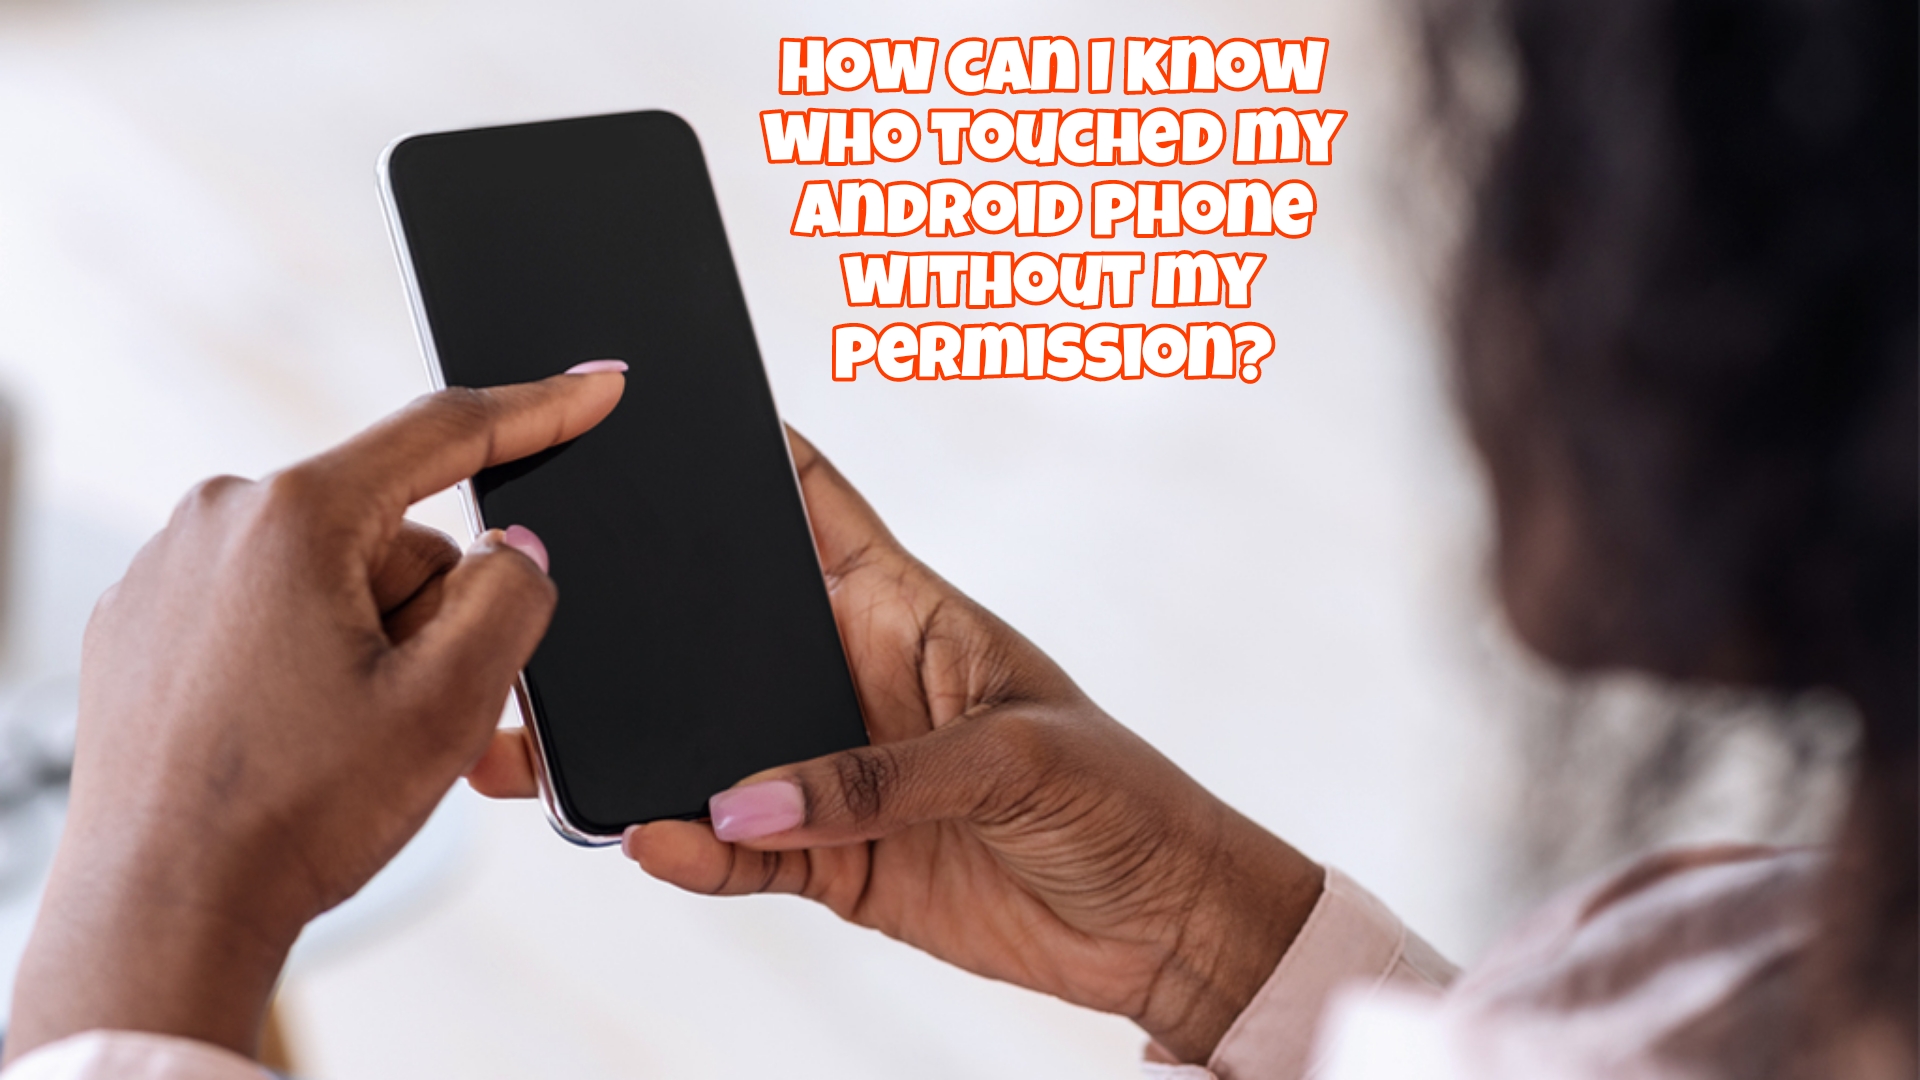 How can I know who touched my Android phone without my permission?